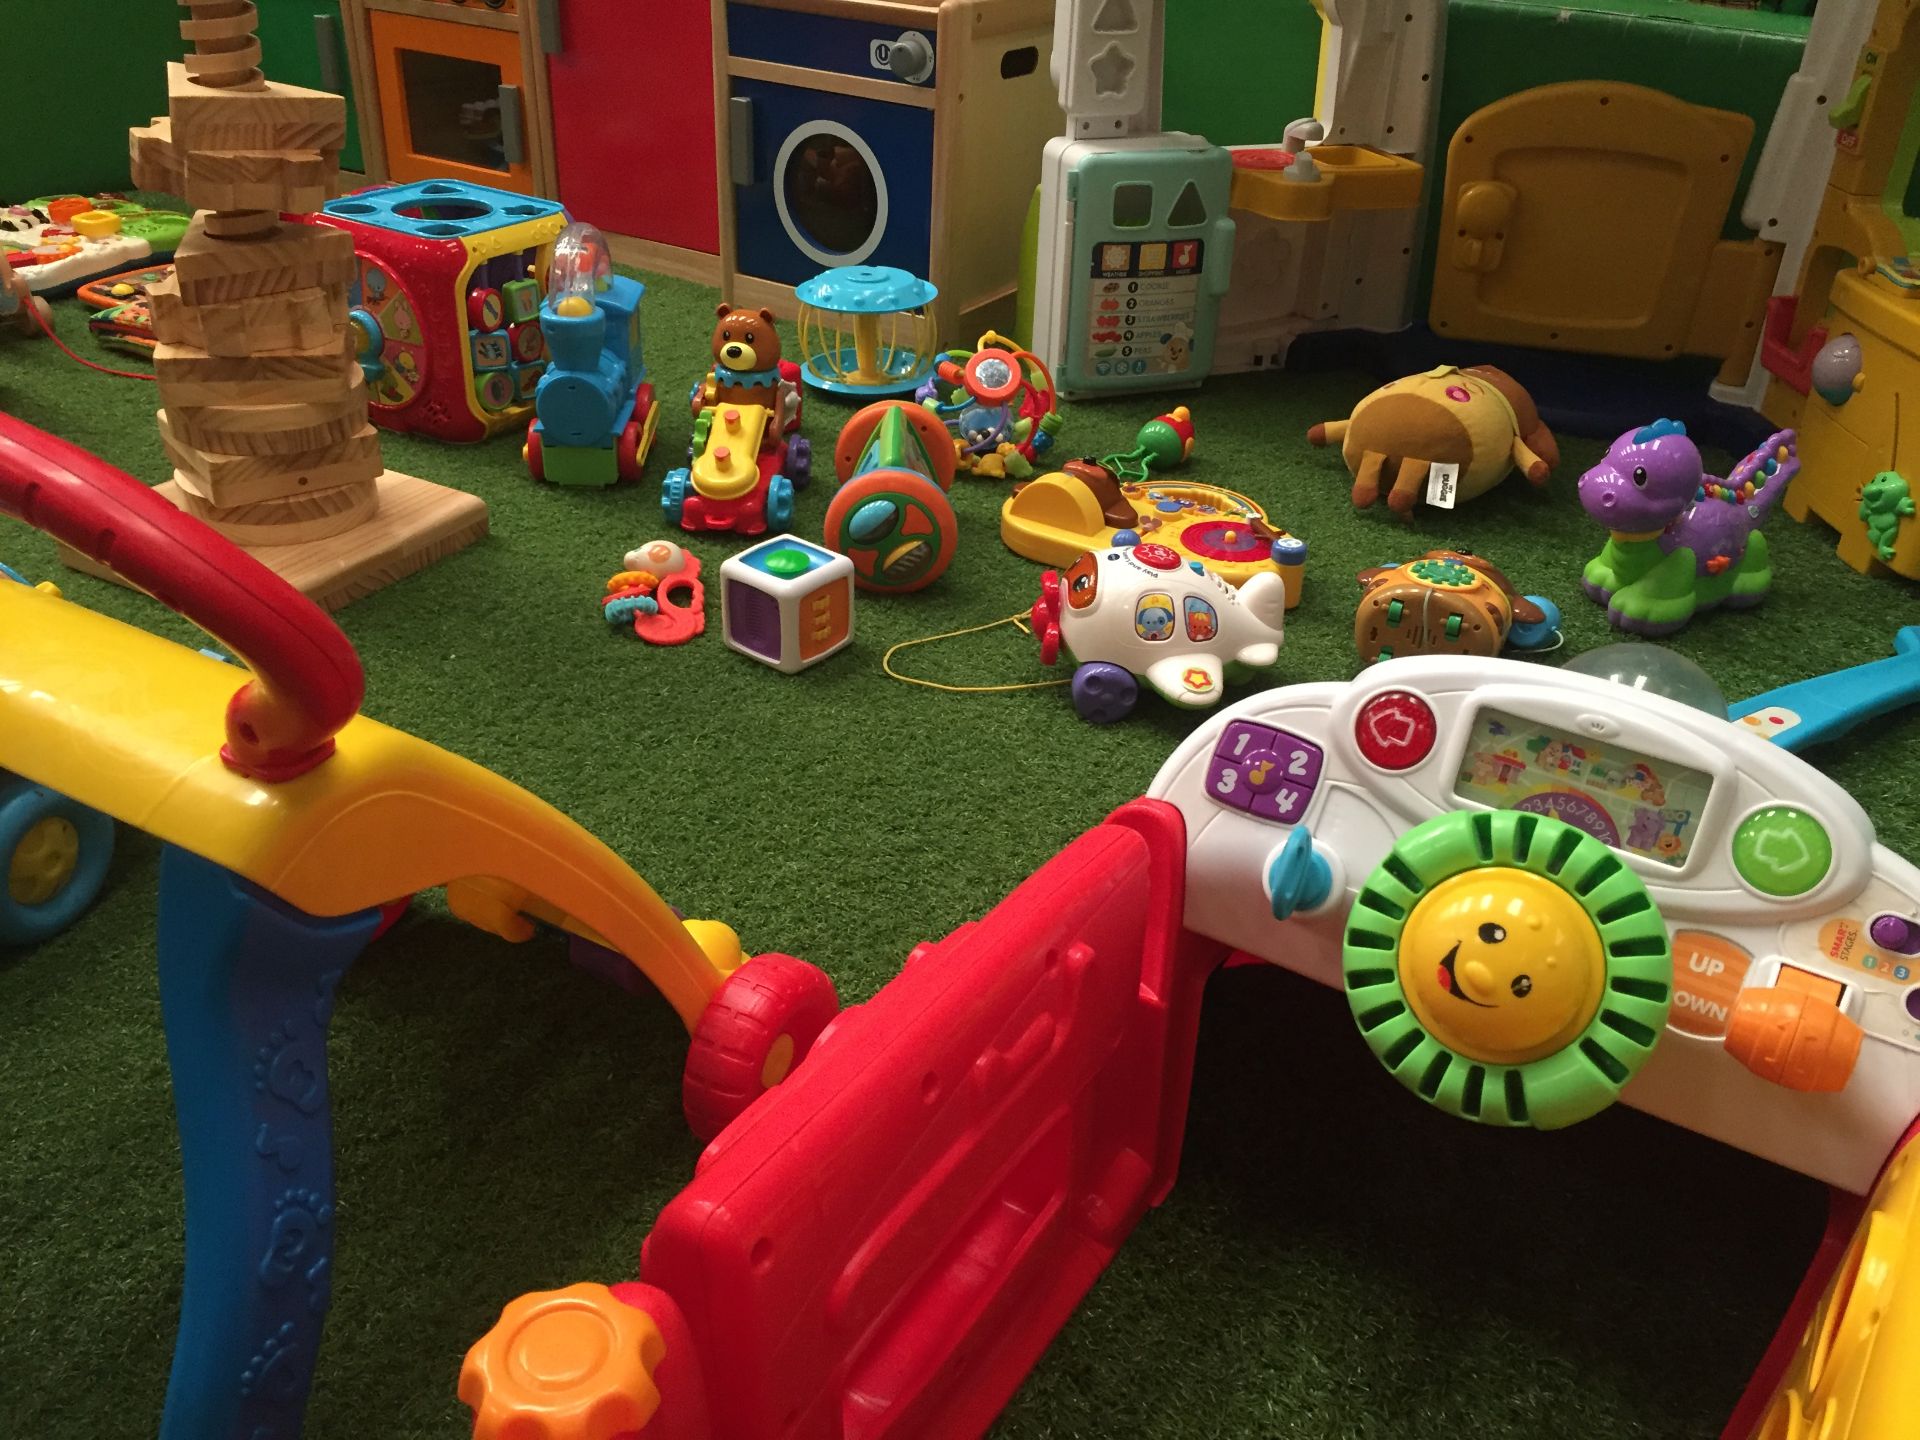 Toddler Play Area - Image 11 of 12